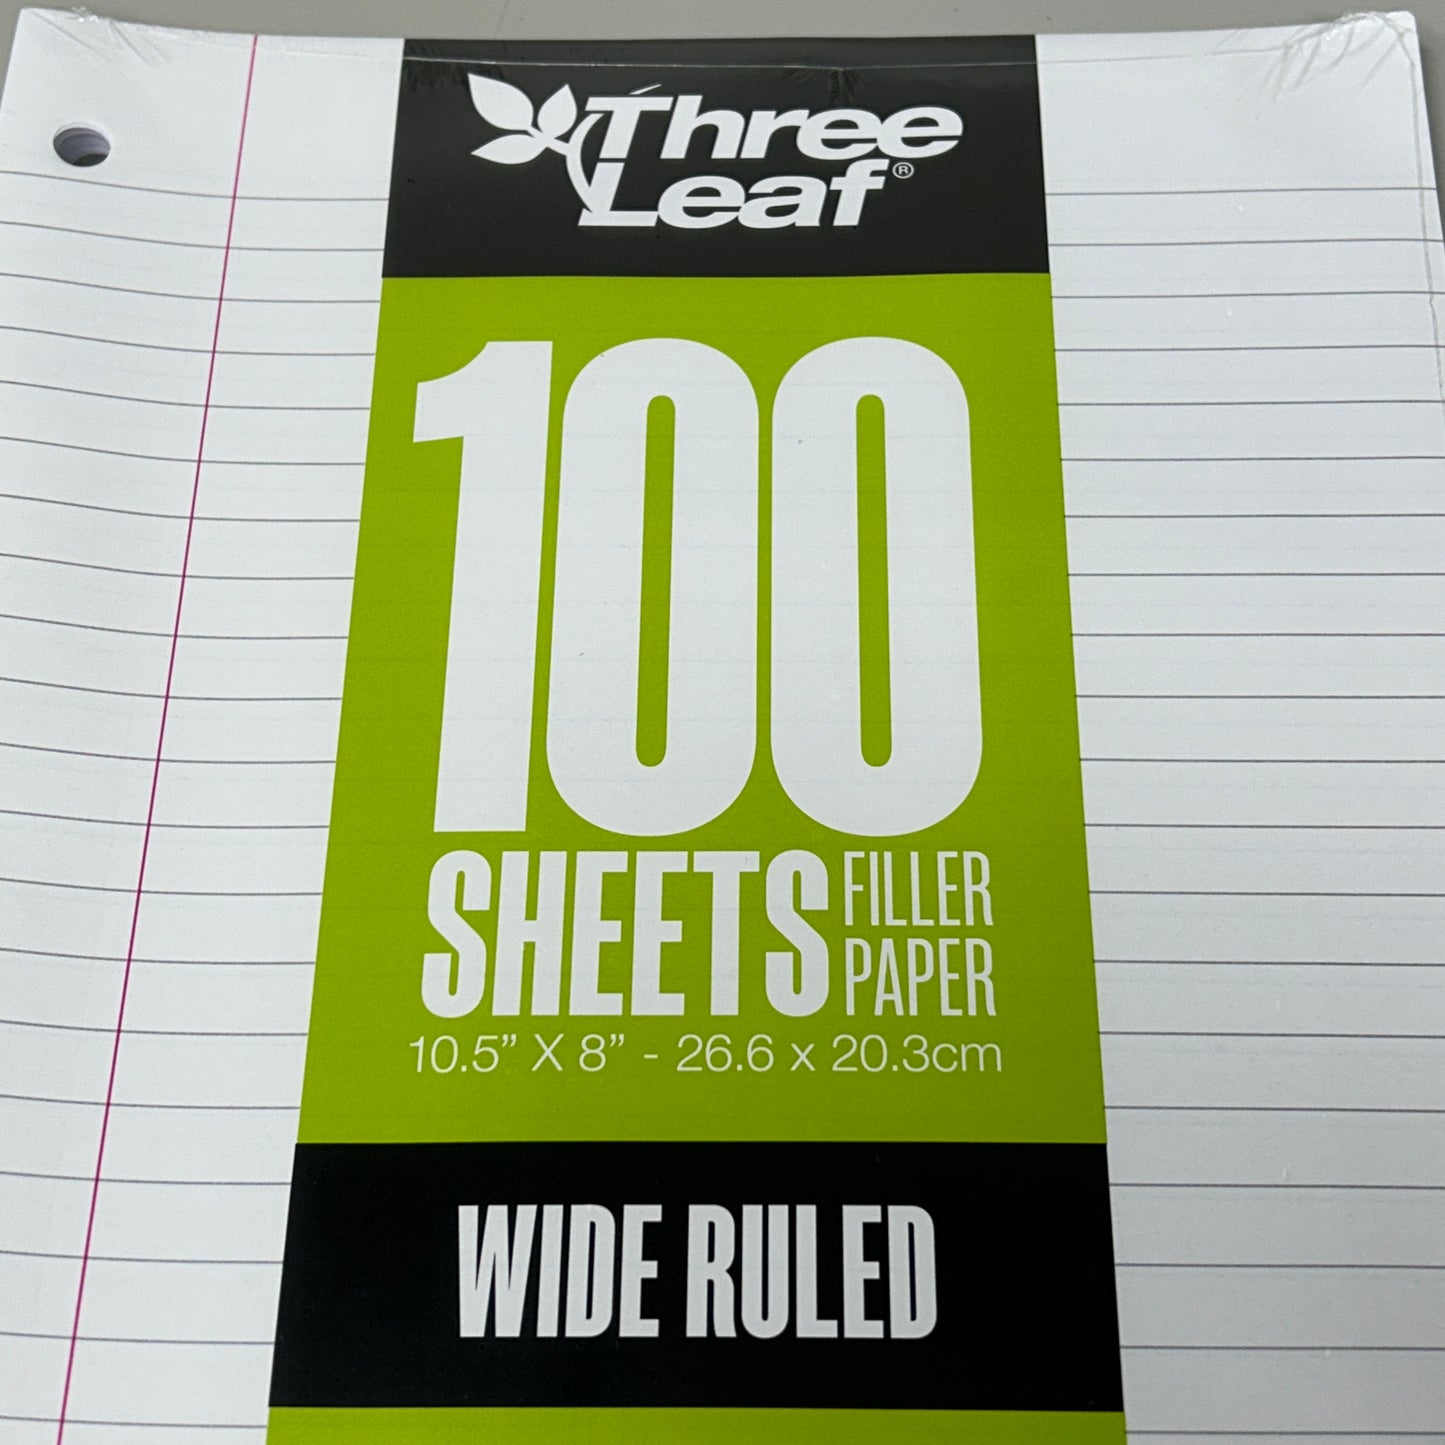 THREE LEAF (36 PACK) Filler Paper Wide Ruled 100 Count 10.5" x 8" (New)